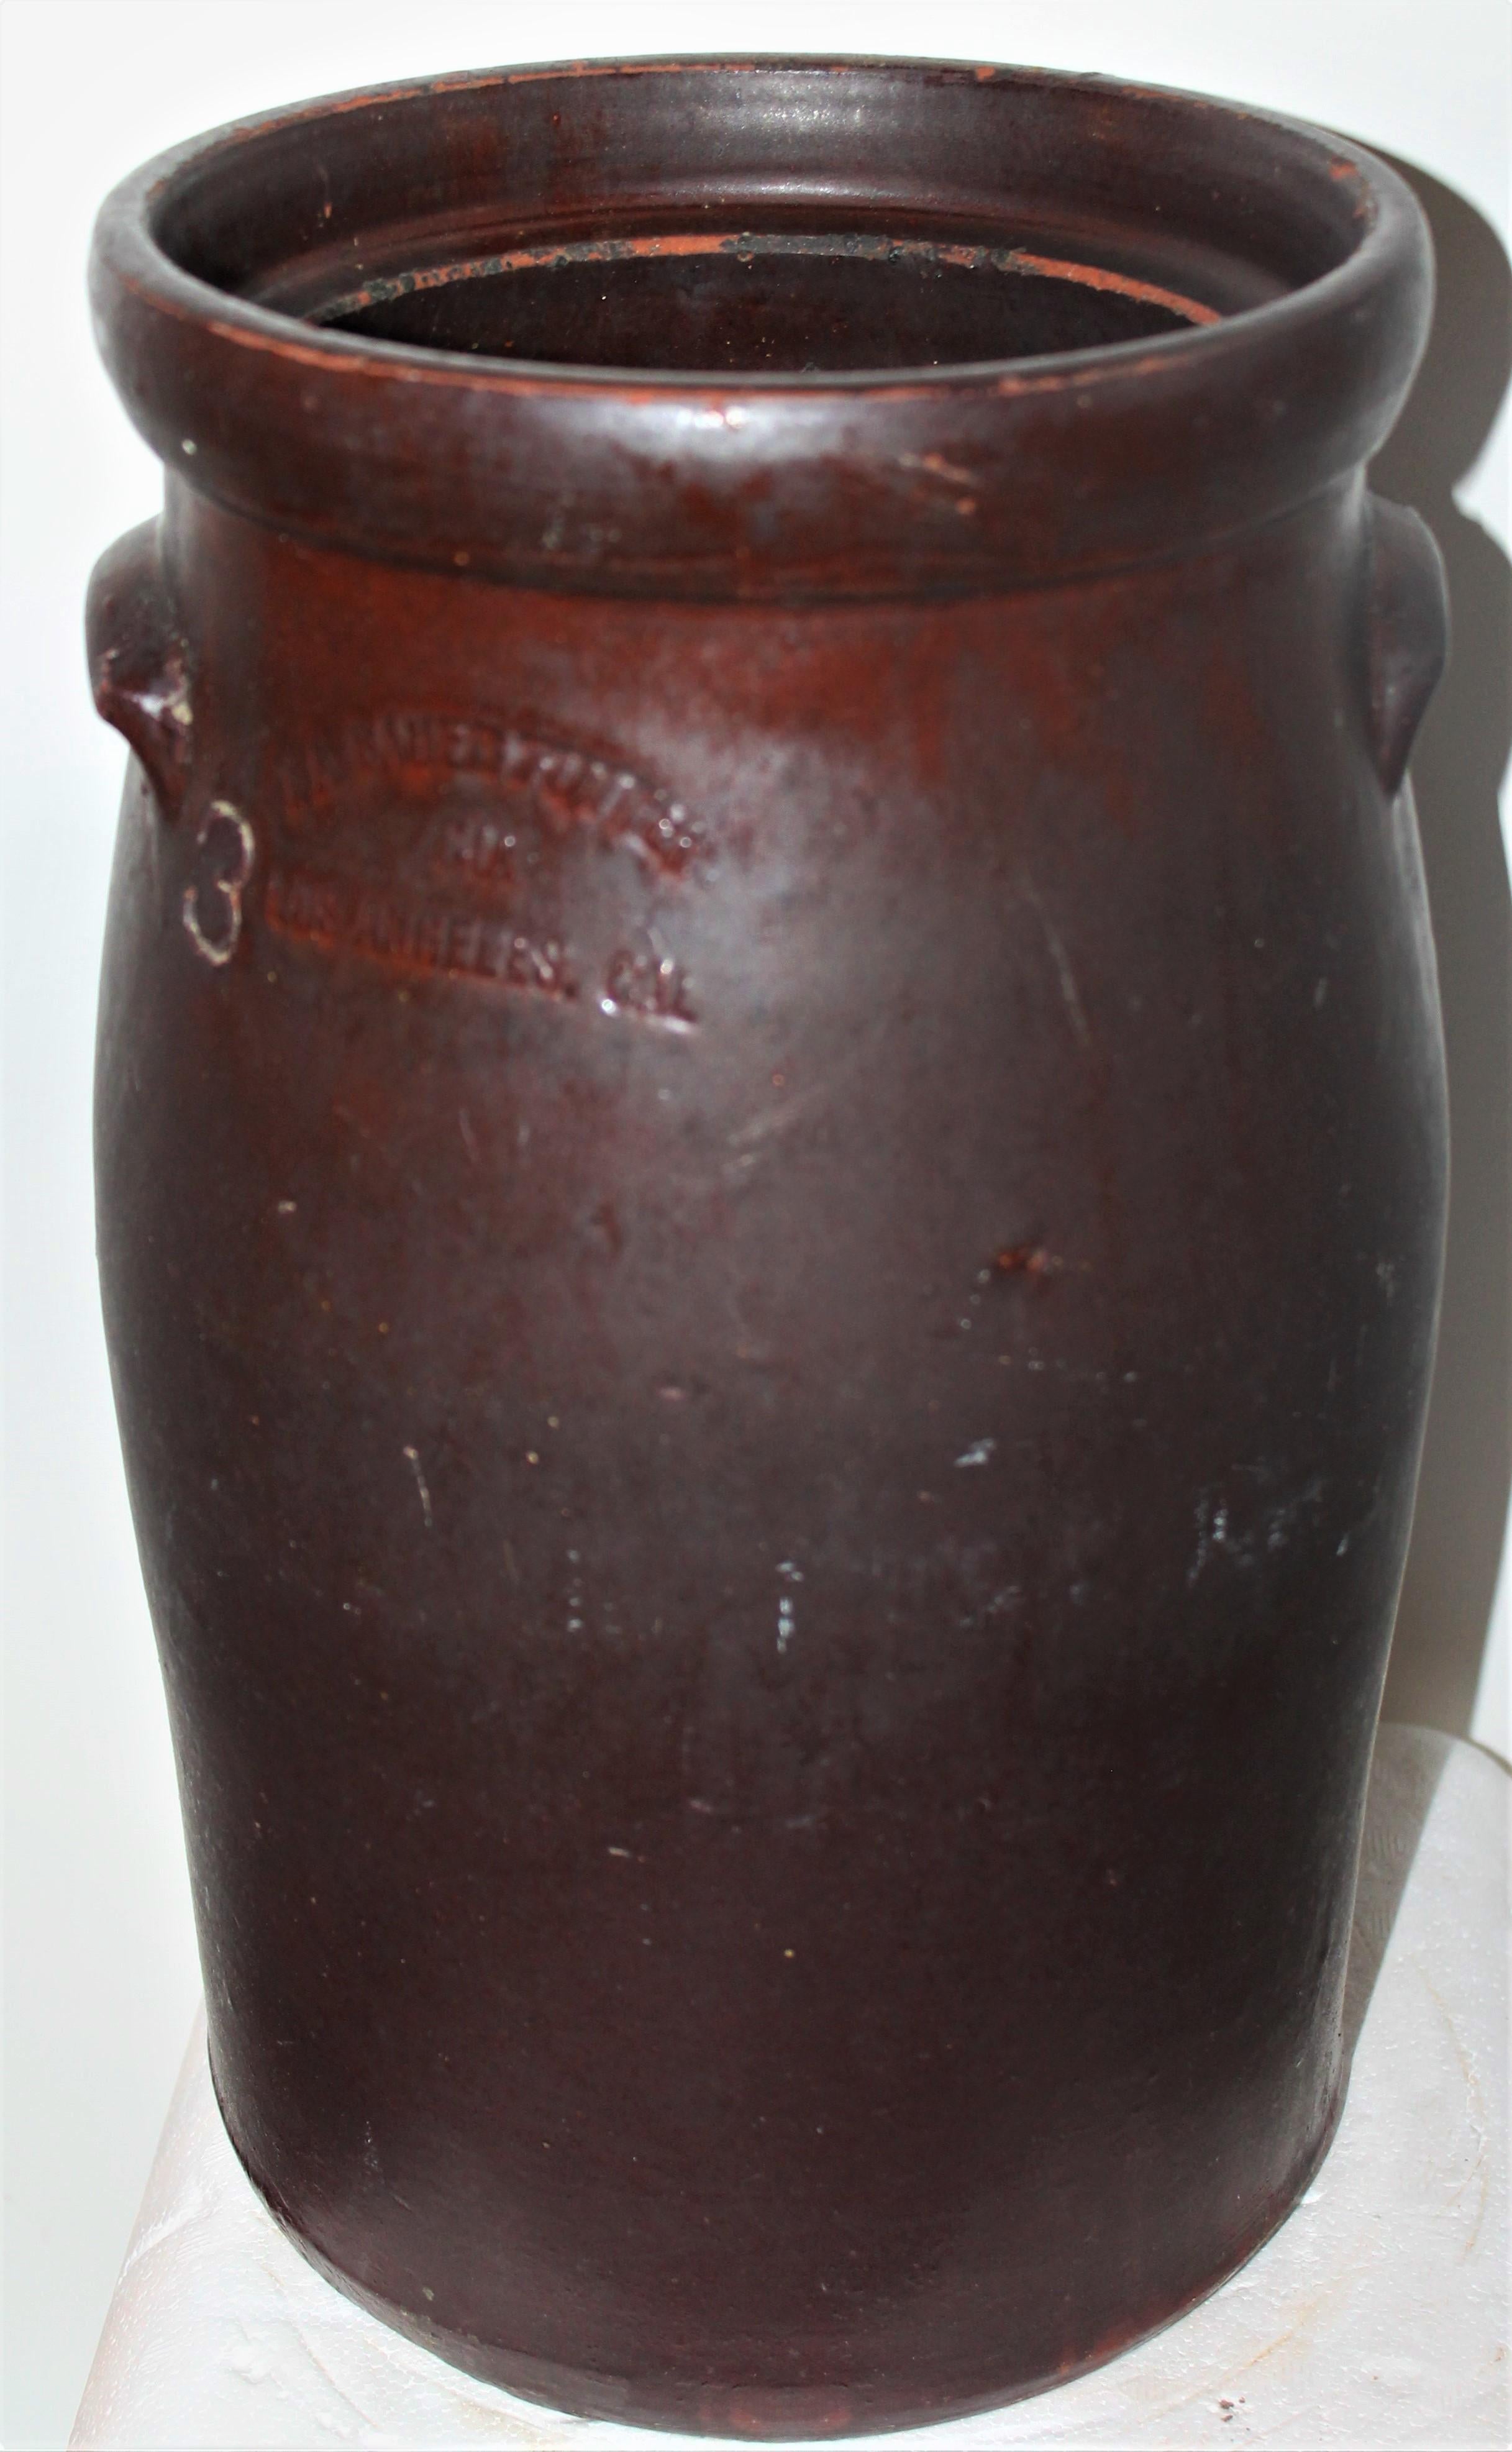 This 19th century red cay glazed crock has double handles and is signed Los Angeles. It has double handles and a chocolate brown finish. The condition is good and it is signed LA BAUER & BAUER / LOS ANGELES.